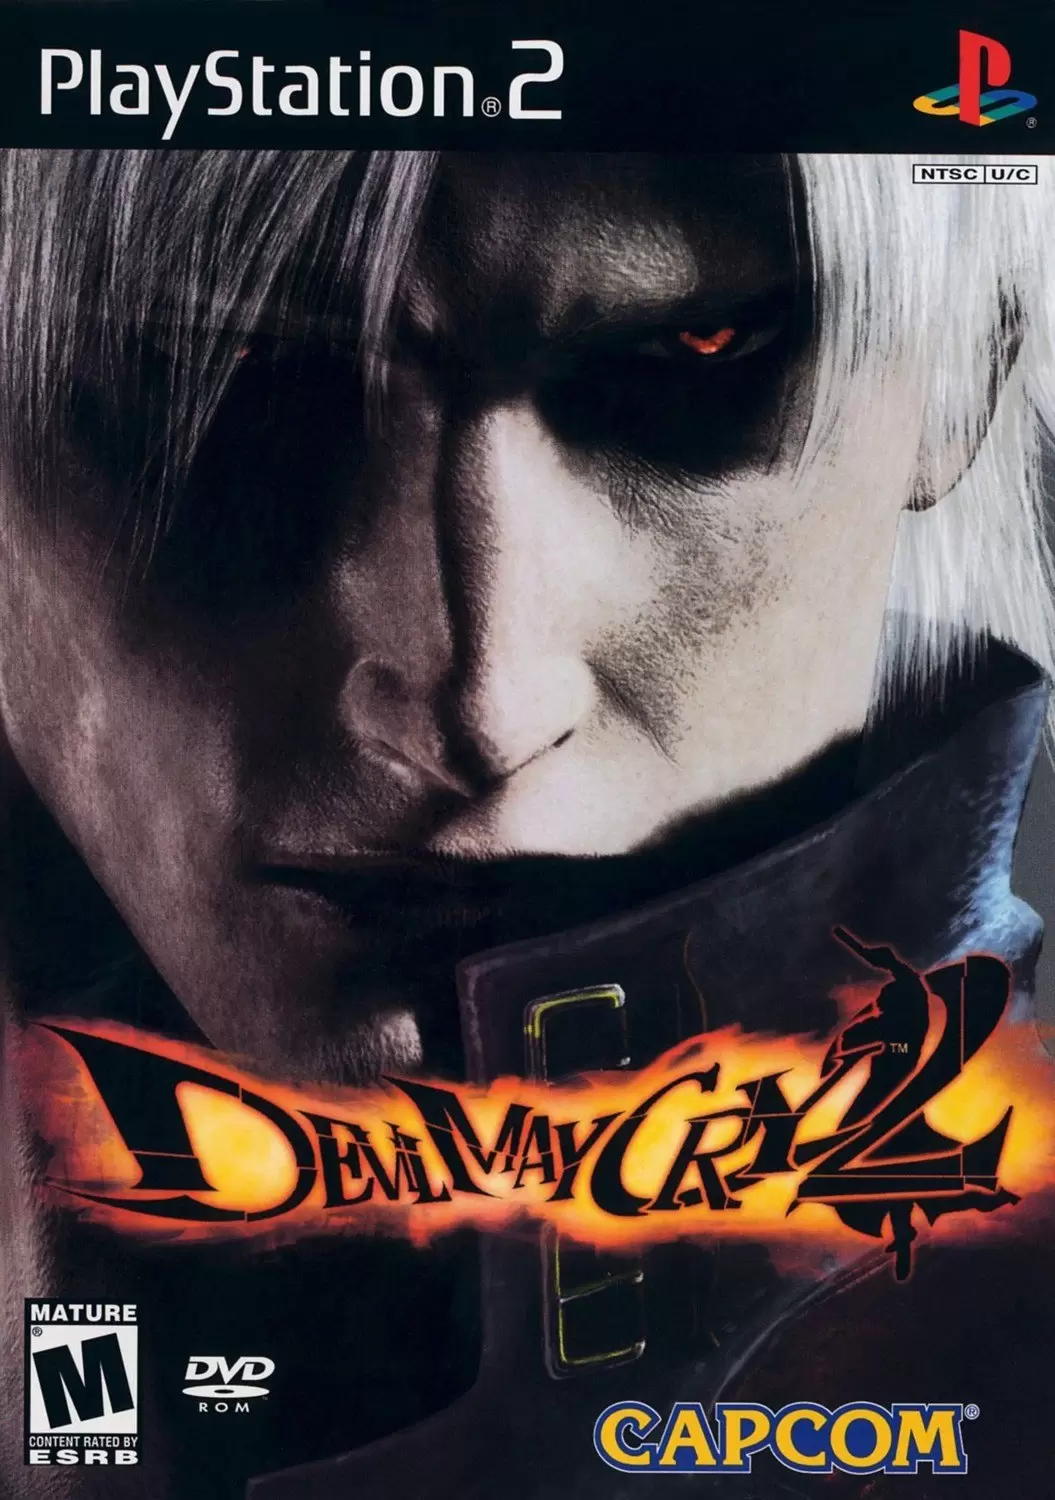 PS2 Games - Devil May Cry 2